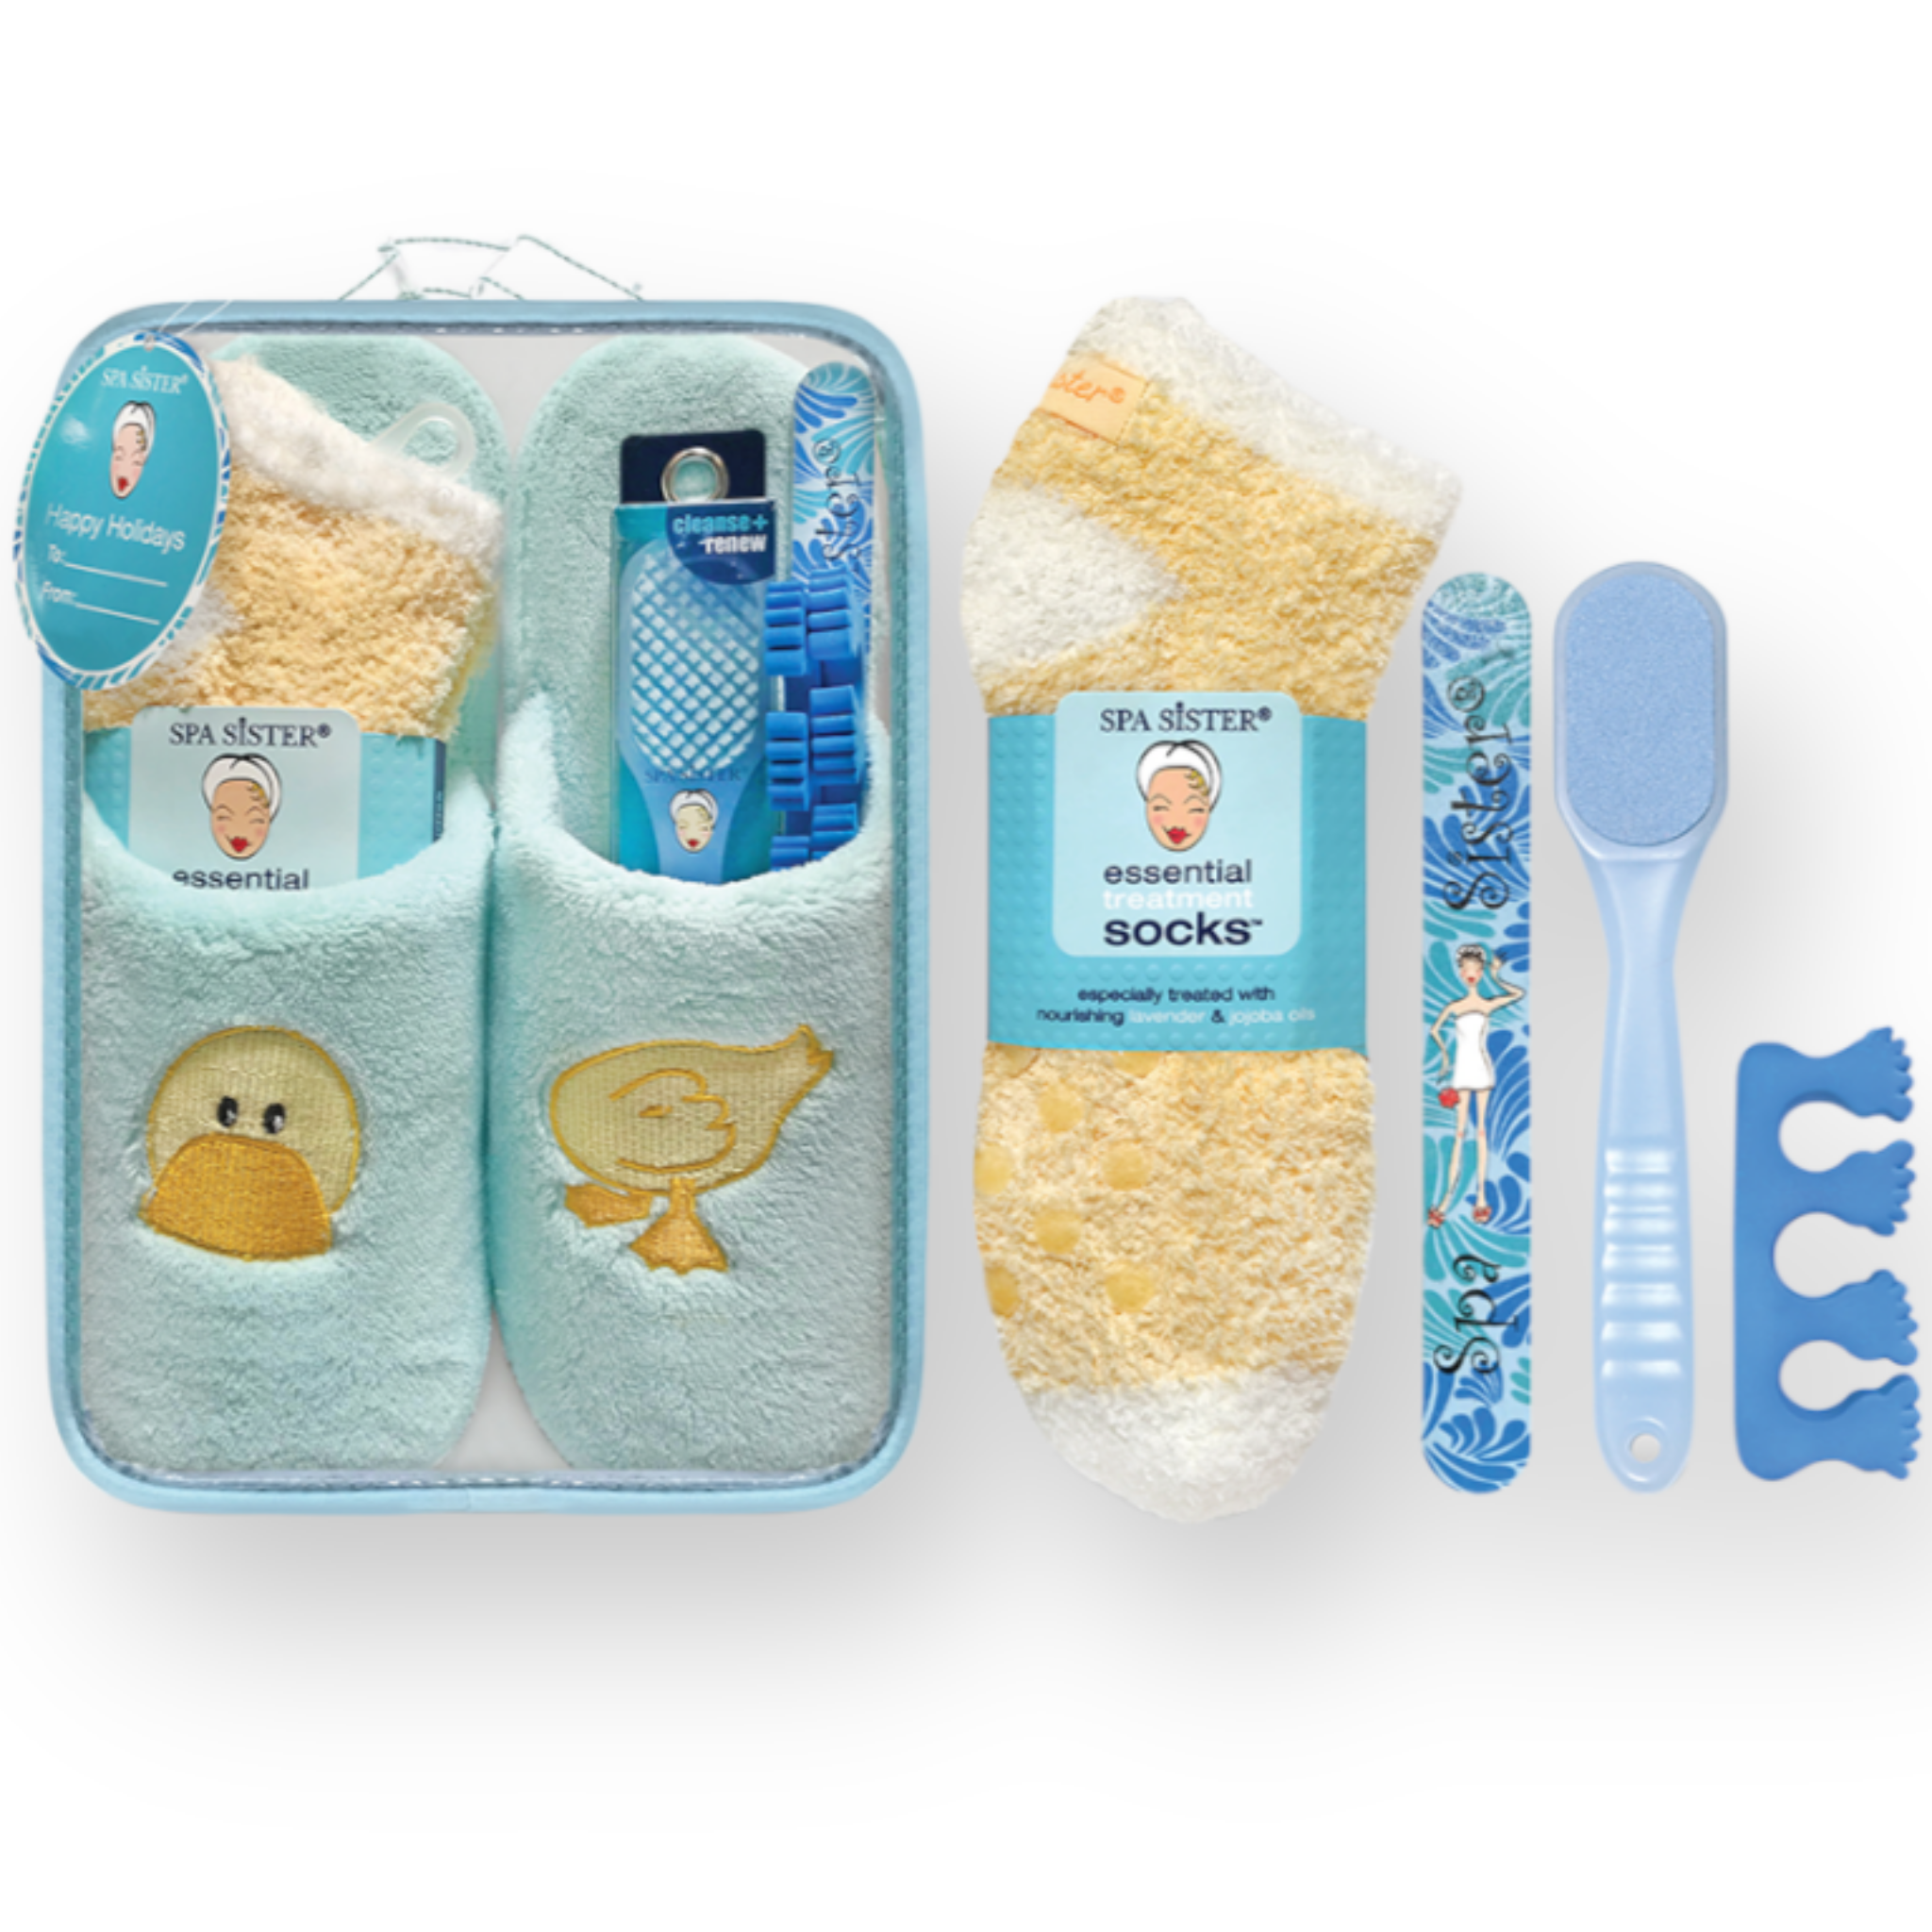 Spa Sister DUCKIE Spa Gift Set Slippers